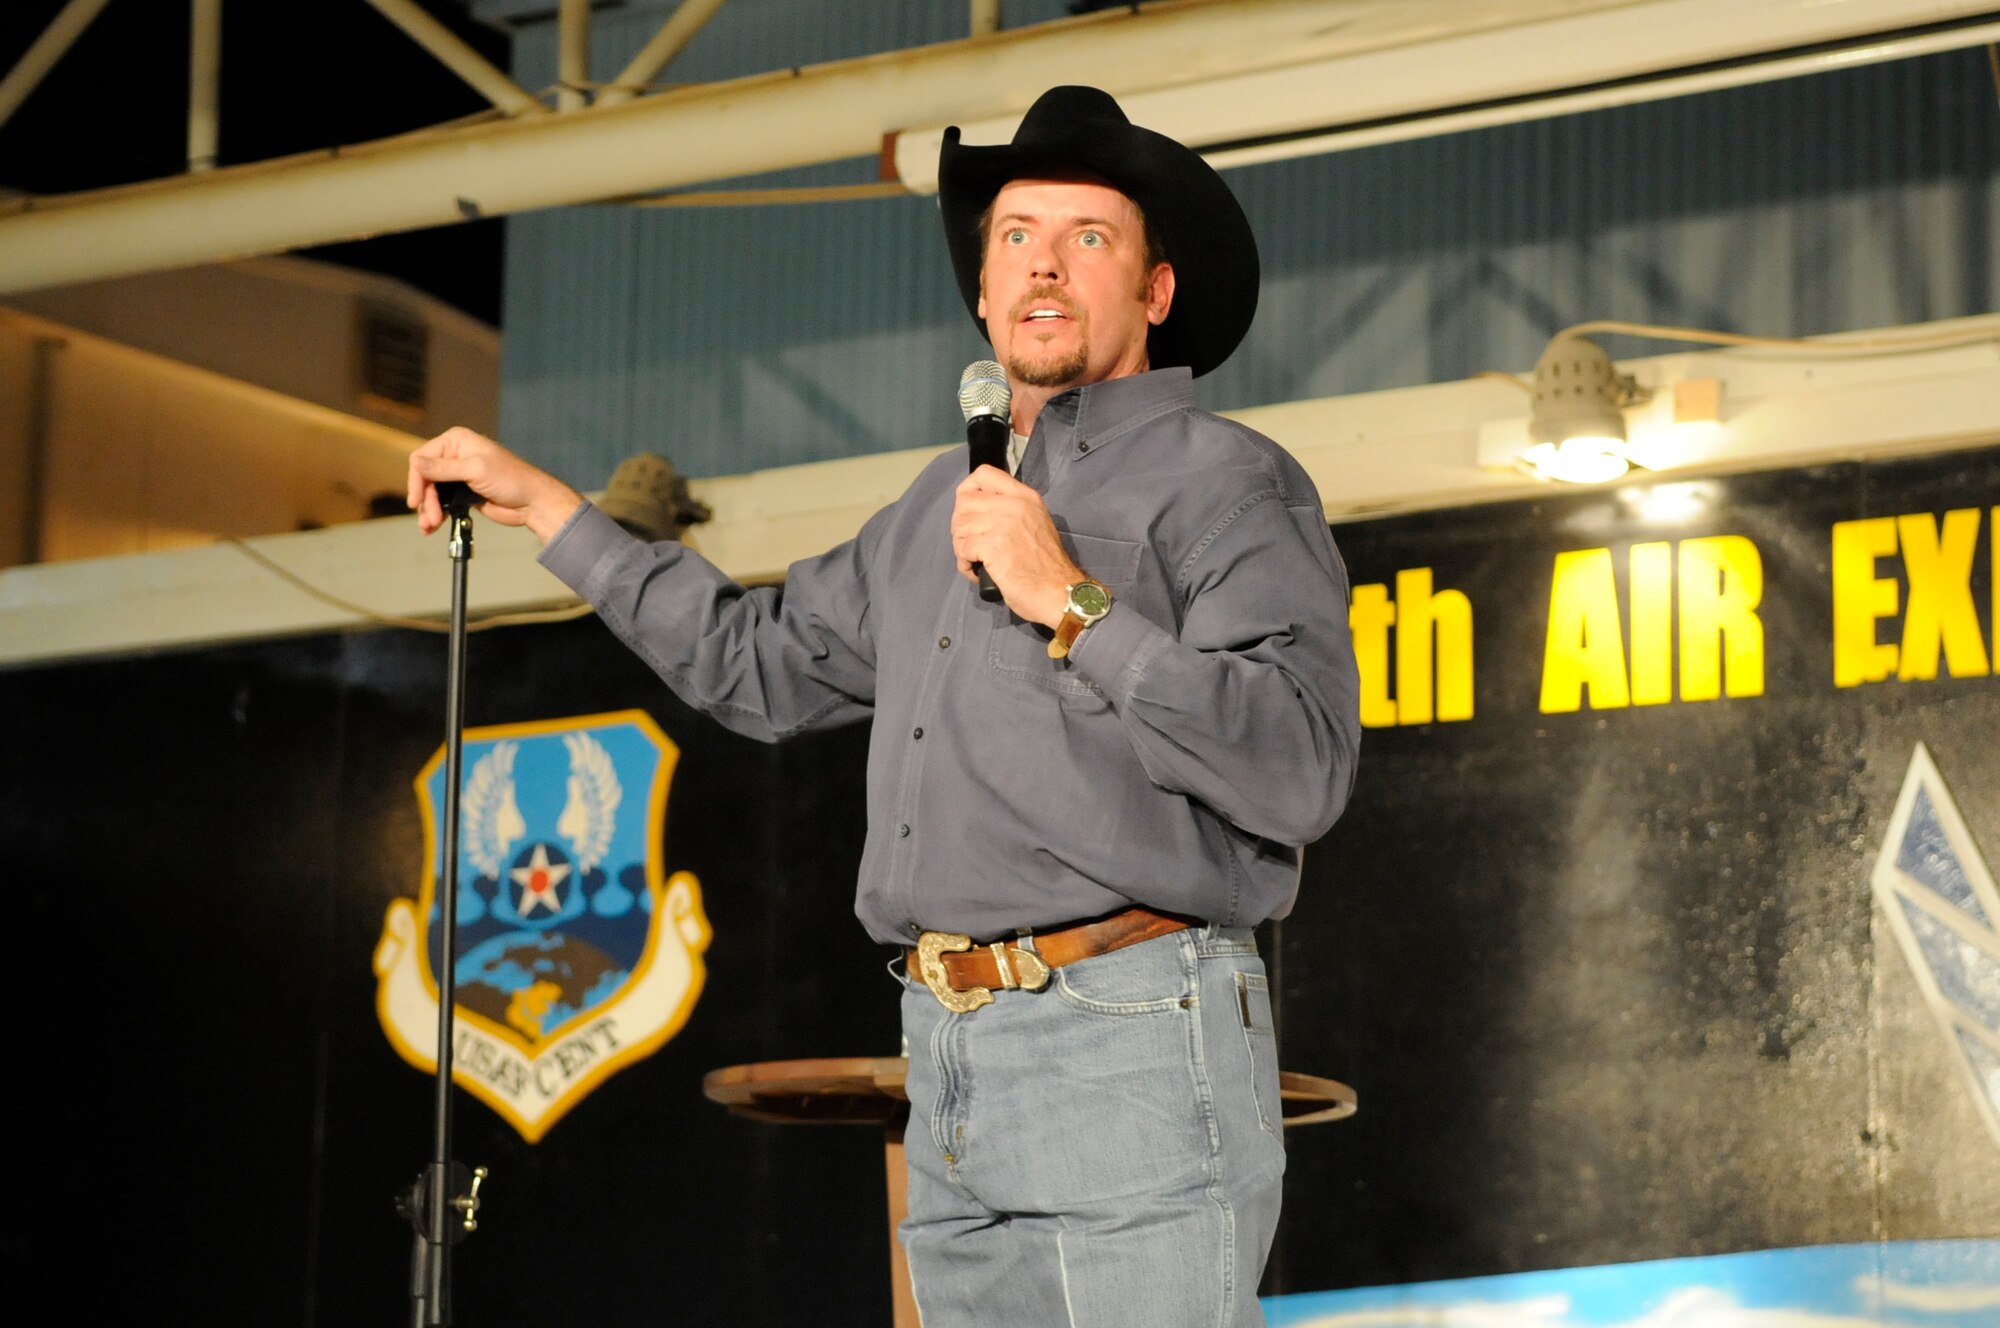 SOUTHWEST ASIA - Cowboy Bill Martin, stand-up comedian, performs his comedy routine to an audience of Airmen and Soldiers at the 380th Air Expeditionary Wing Nov. 16, 2009. The "Red, White and A Little Bluer" tour was presented by Armed Forces Entertainment and is composed of stand-up comedians Cowboy Bill Martin, Dan Davidson and Justin Leon. (U.S. Air Force photo/Senior Airman Stephen Linch)
